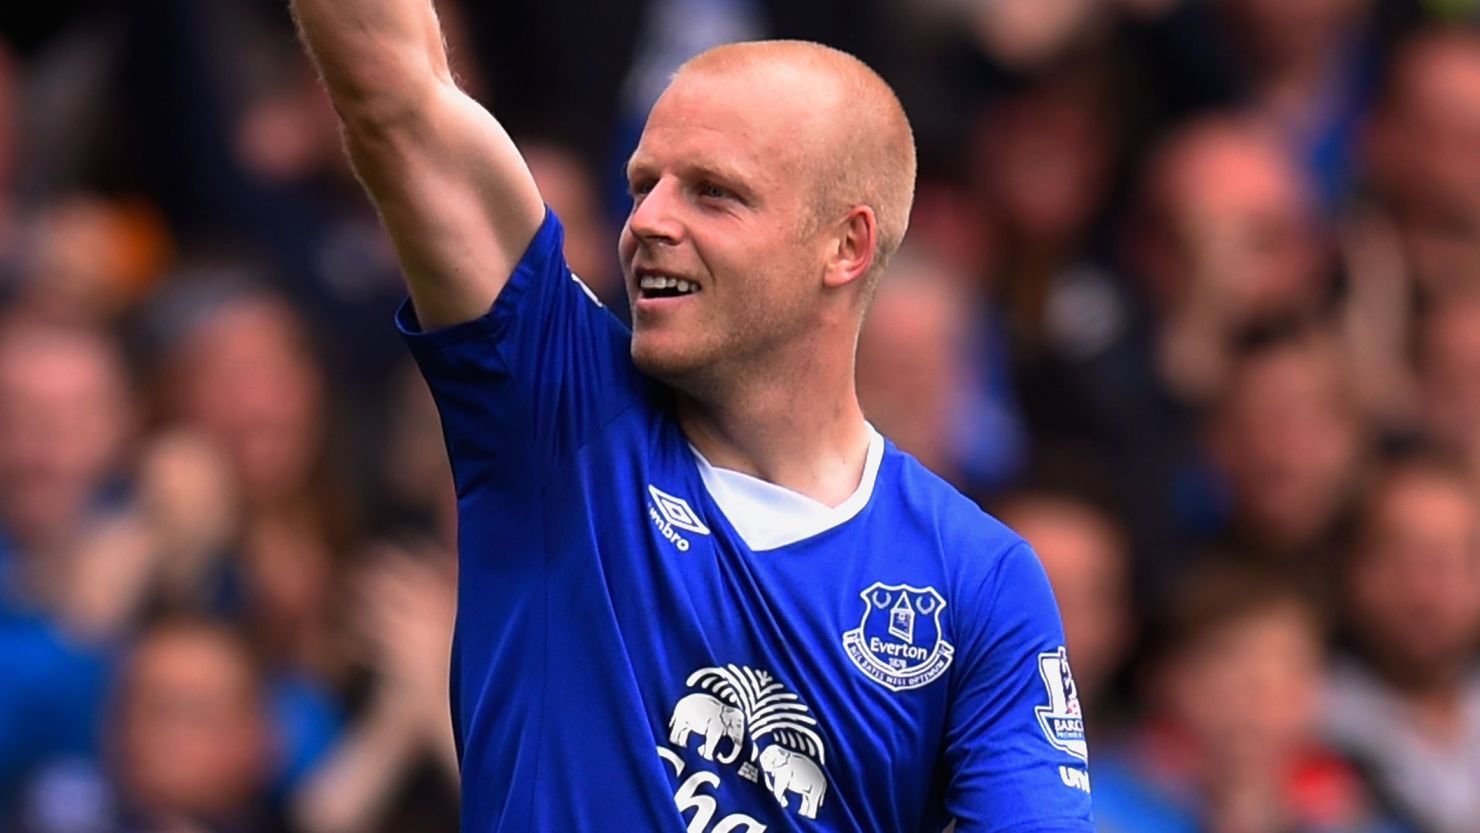 Steven Naismith of Everton celebrates scoring his hat trick goal against Chelsea in Everton's 3-1 win at Goodison Park. 